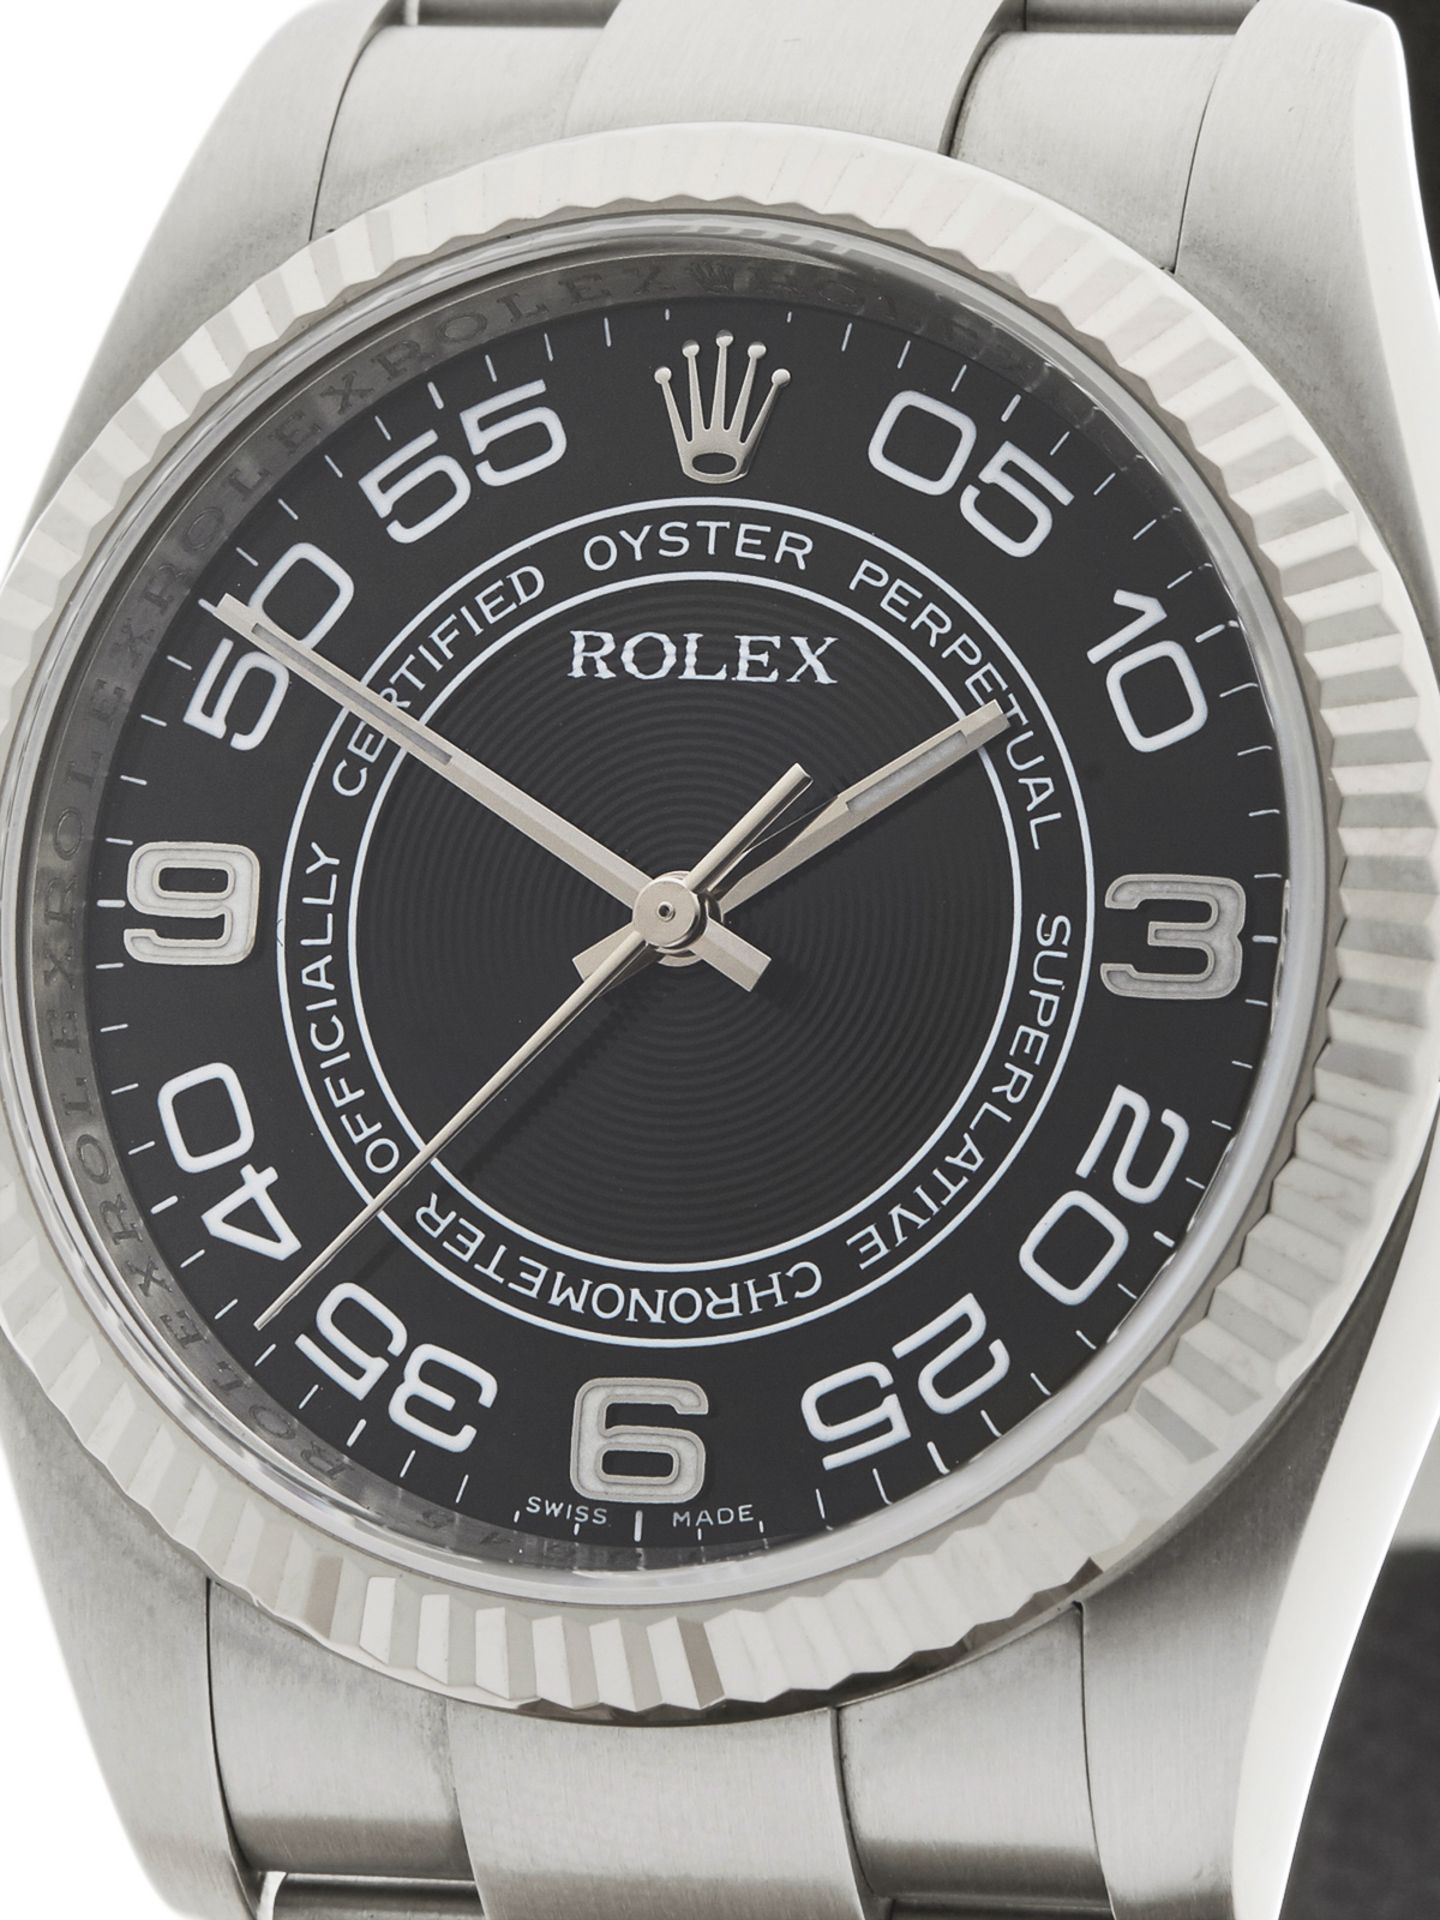 Rolex Oyster Perpetual - Image 3 of 9